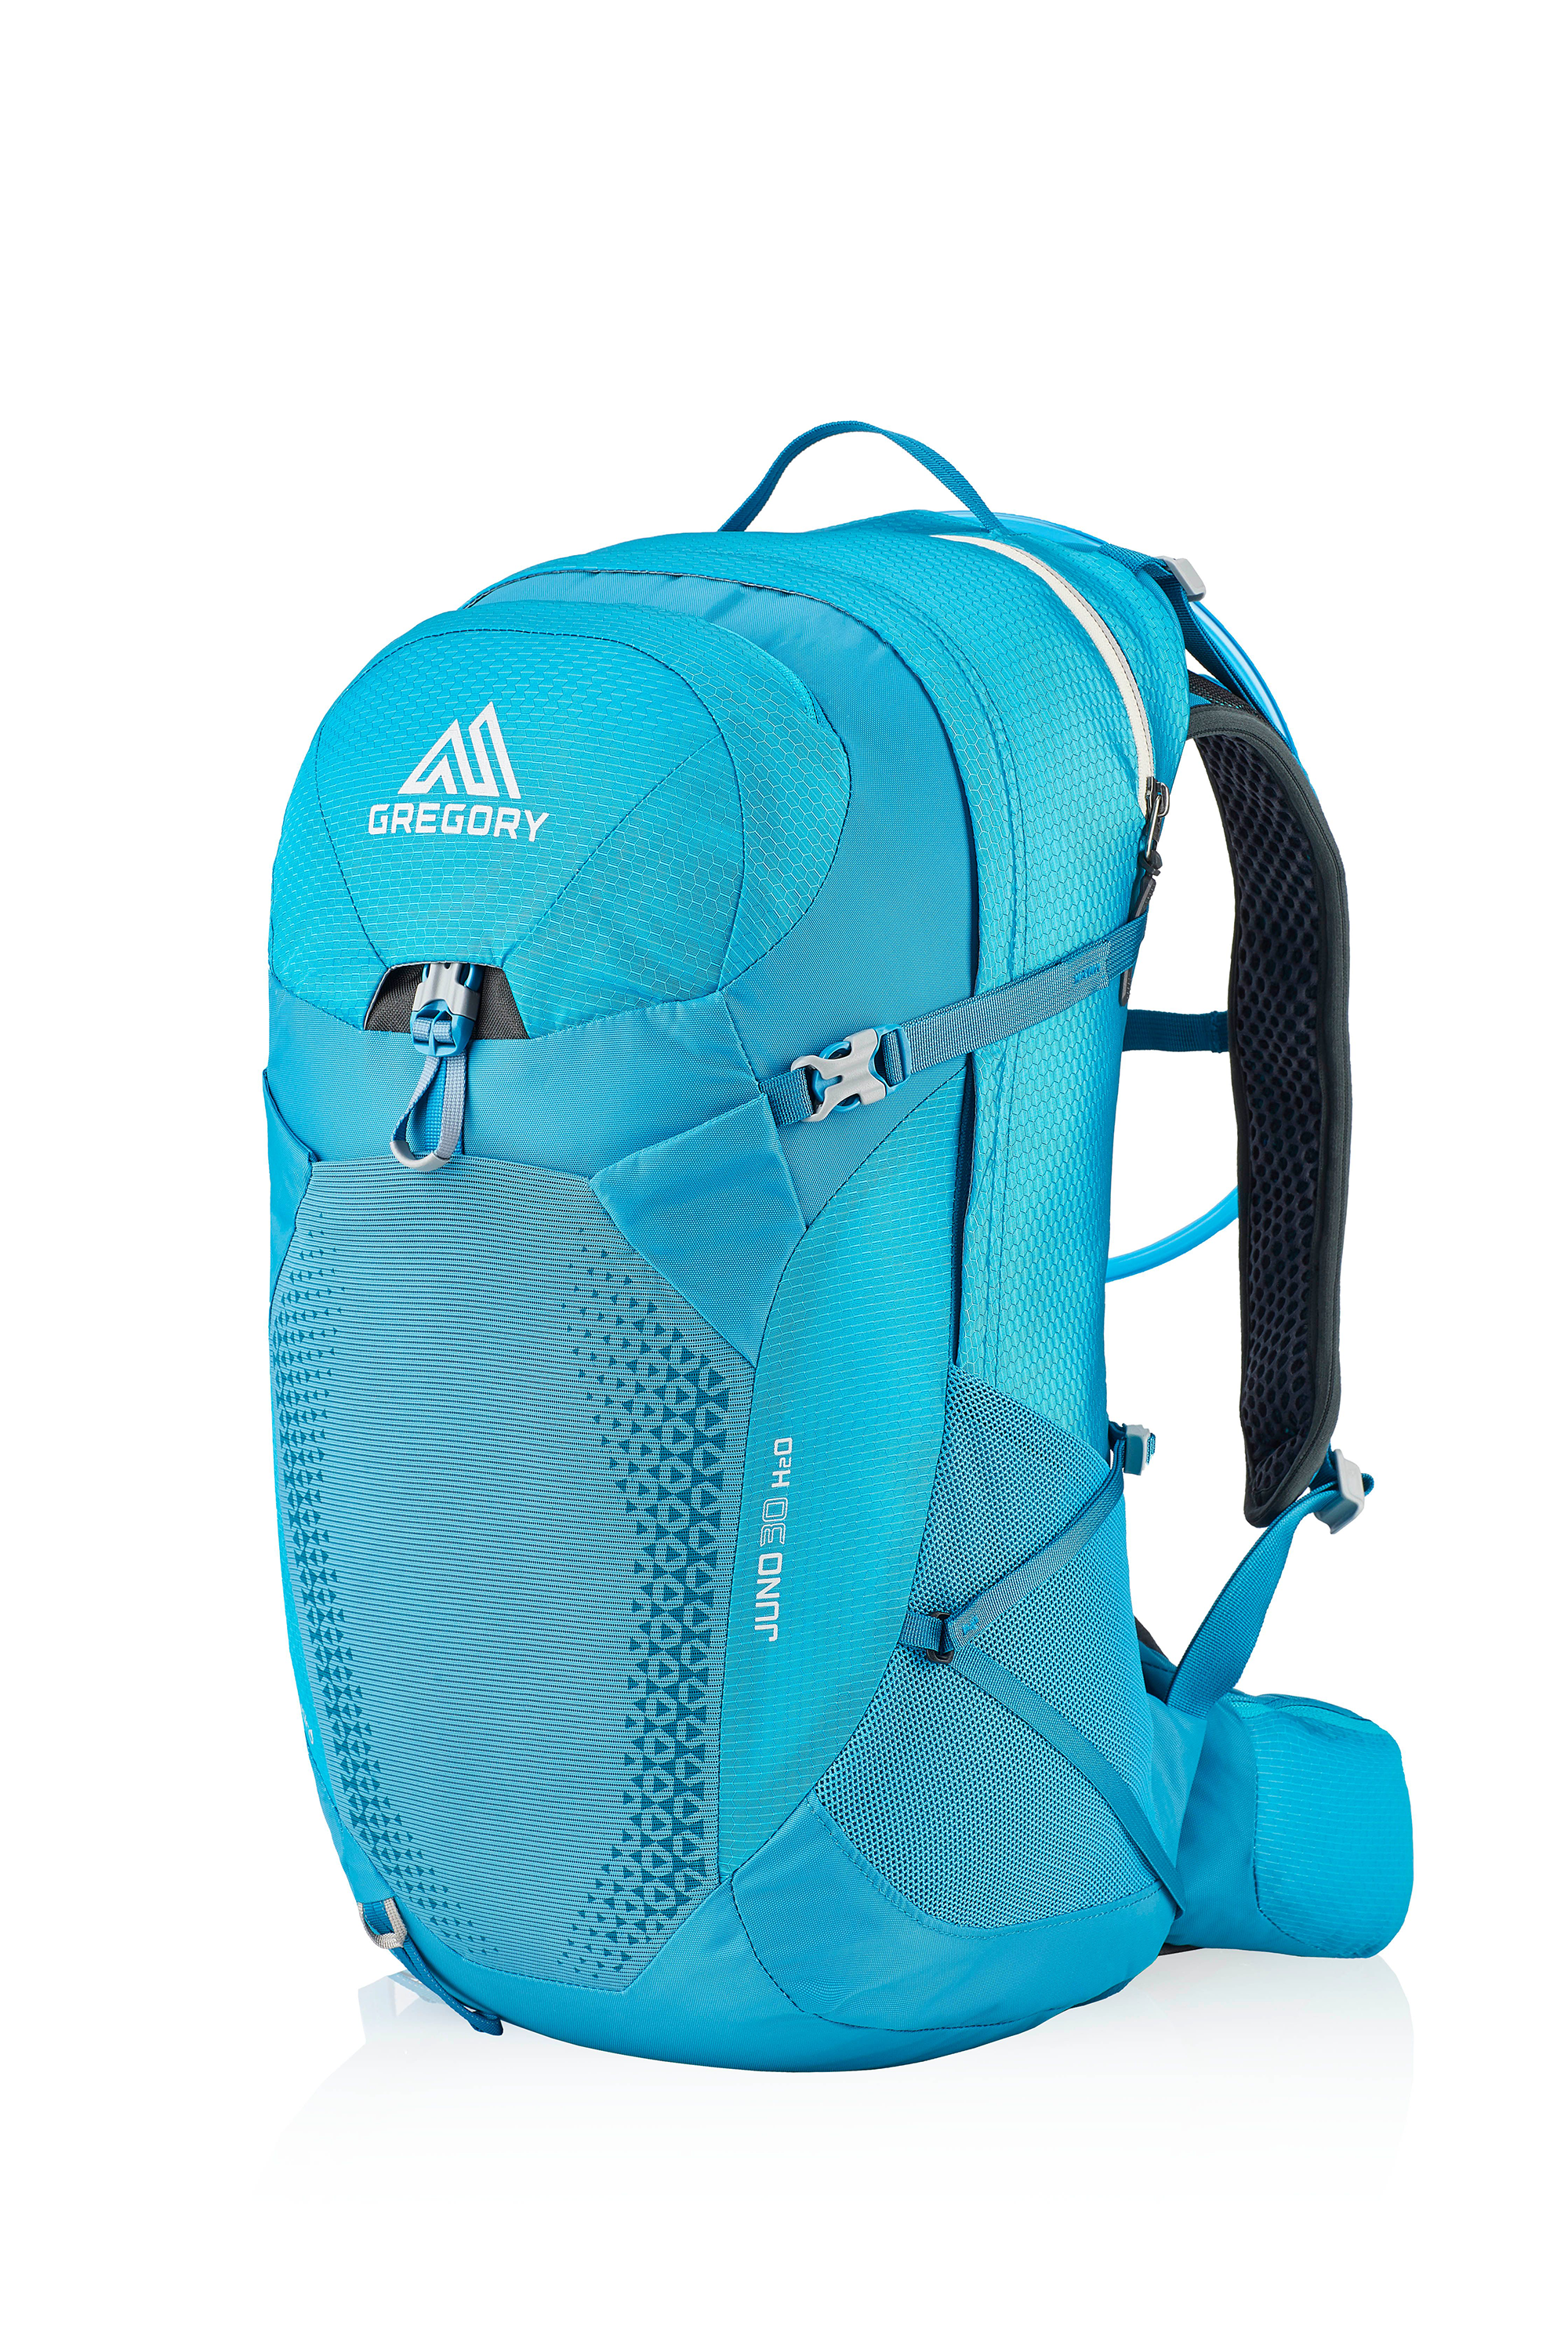 Gregory Juno 30 H2O Hydration Pack for Ladies - Laguna Blue